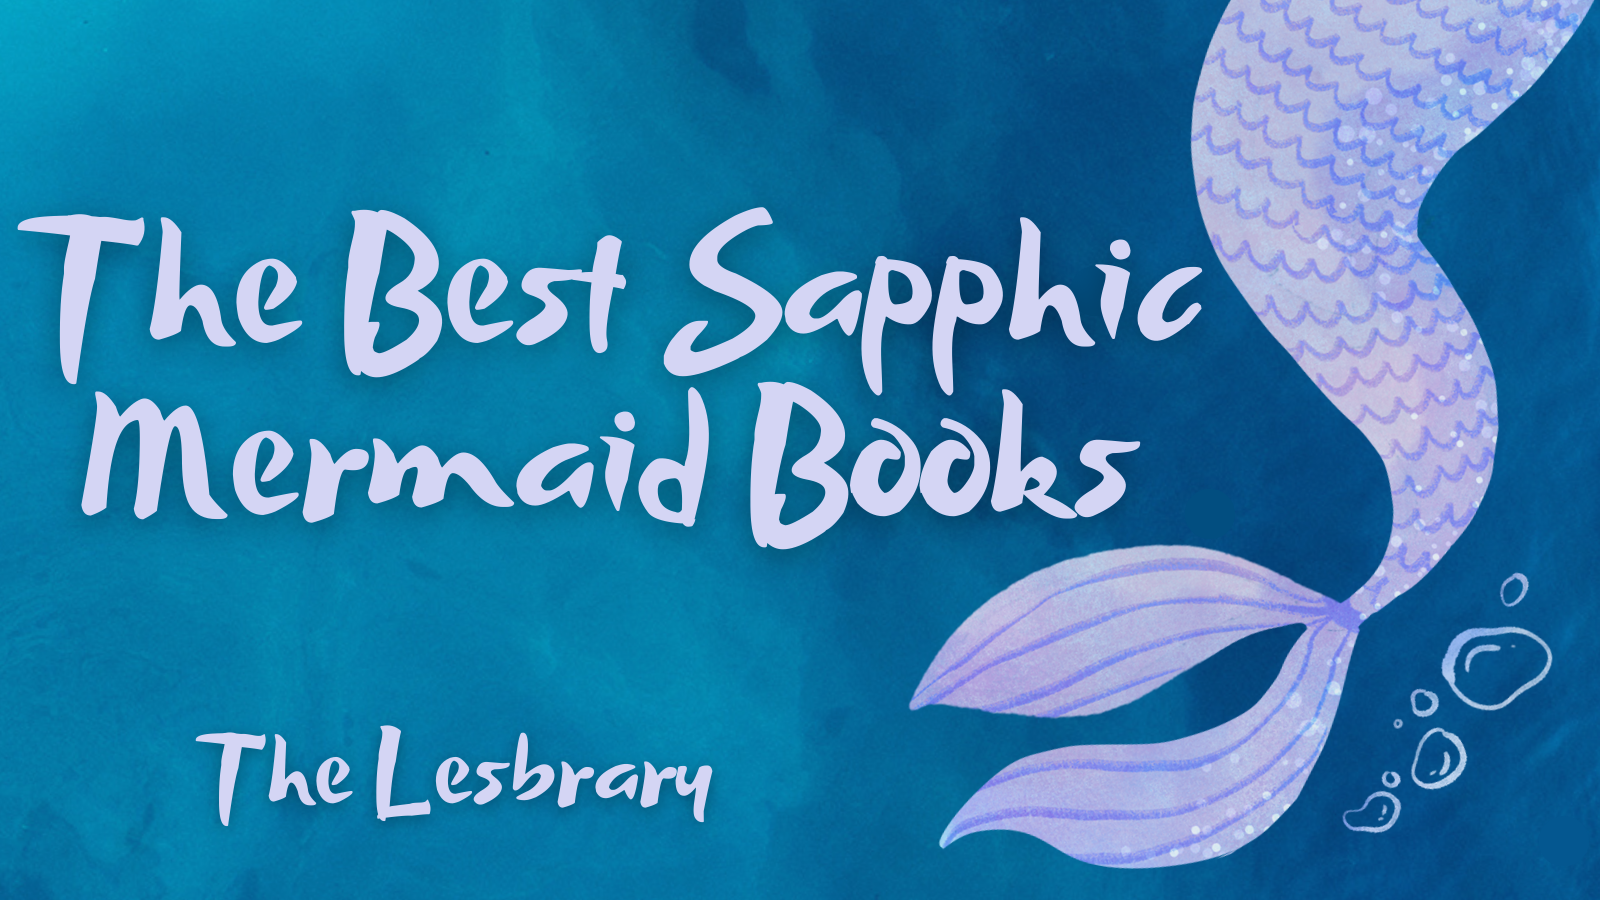 a graphic of a mermaid tail with the text The Best Sapphic Mermaid Books